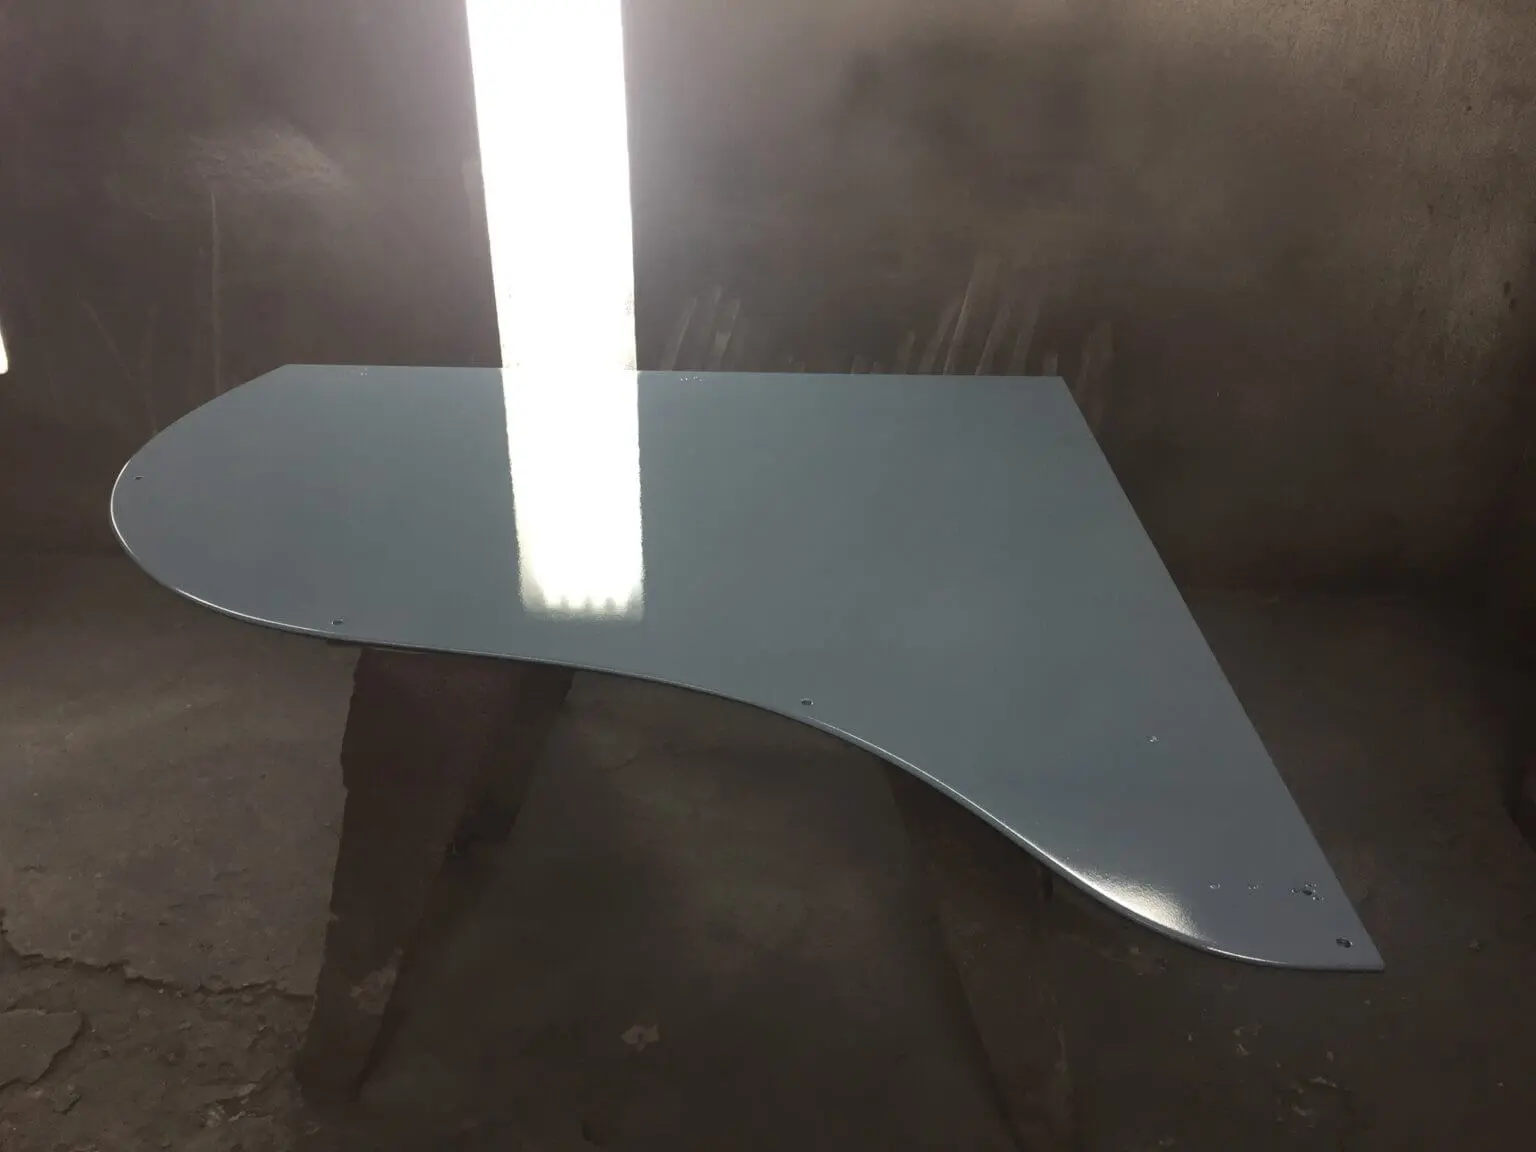 A table with a light on it